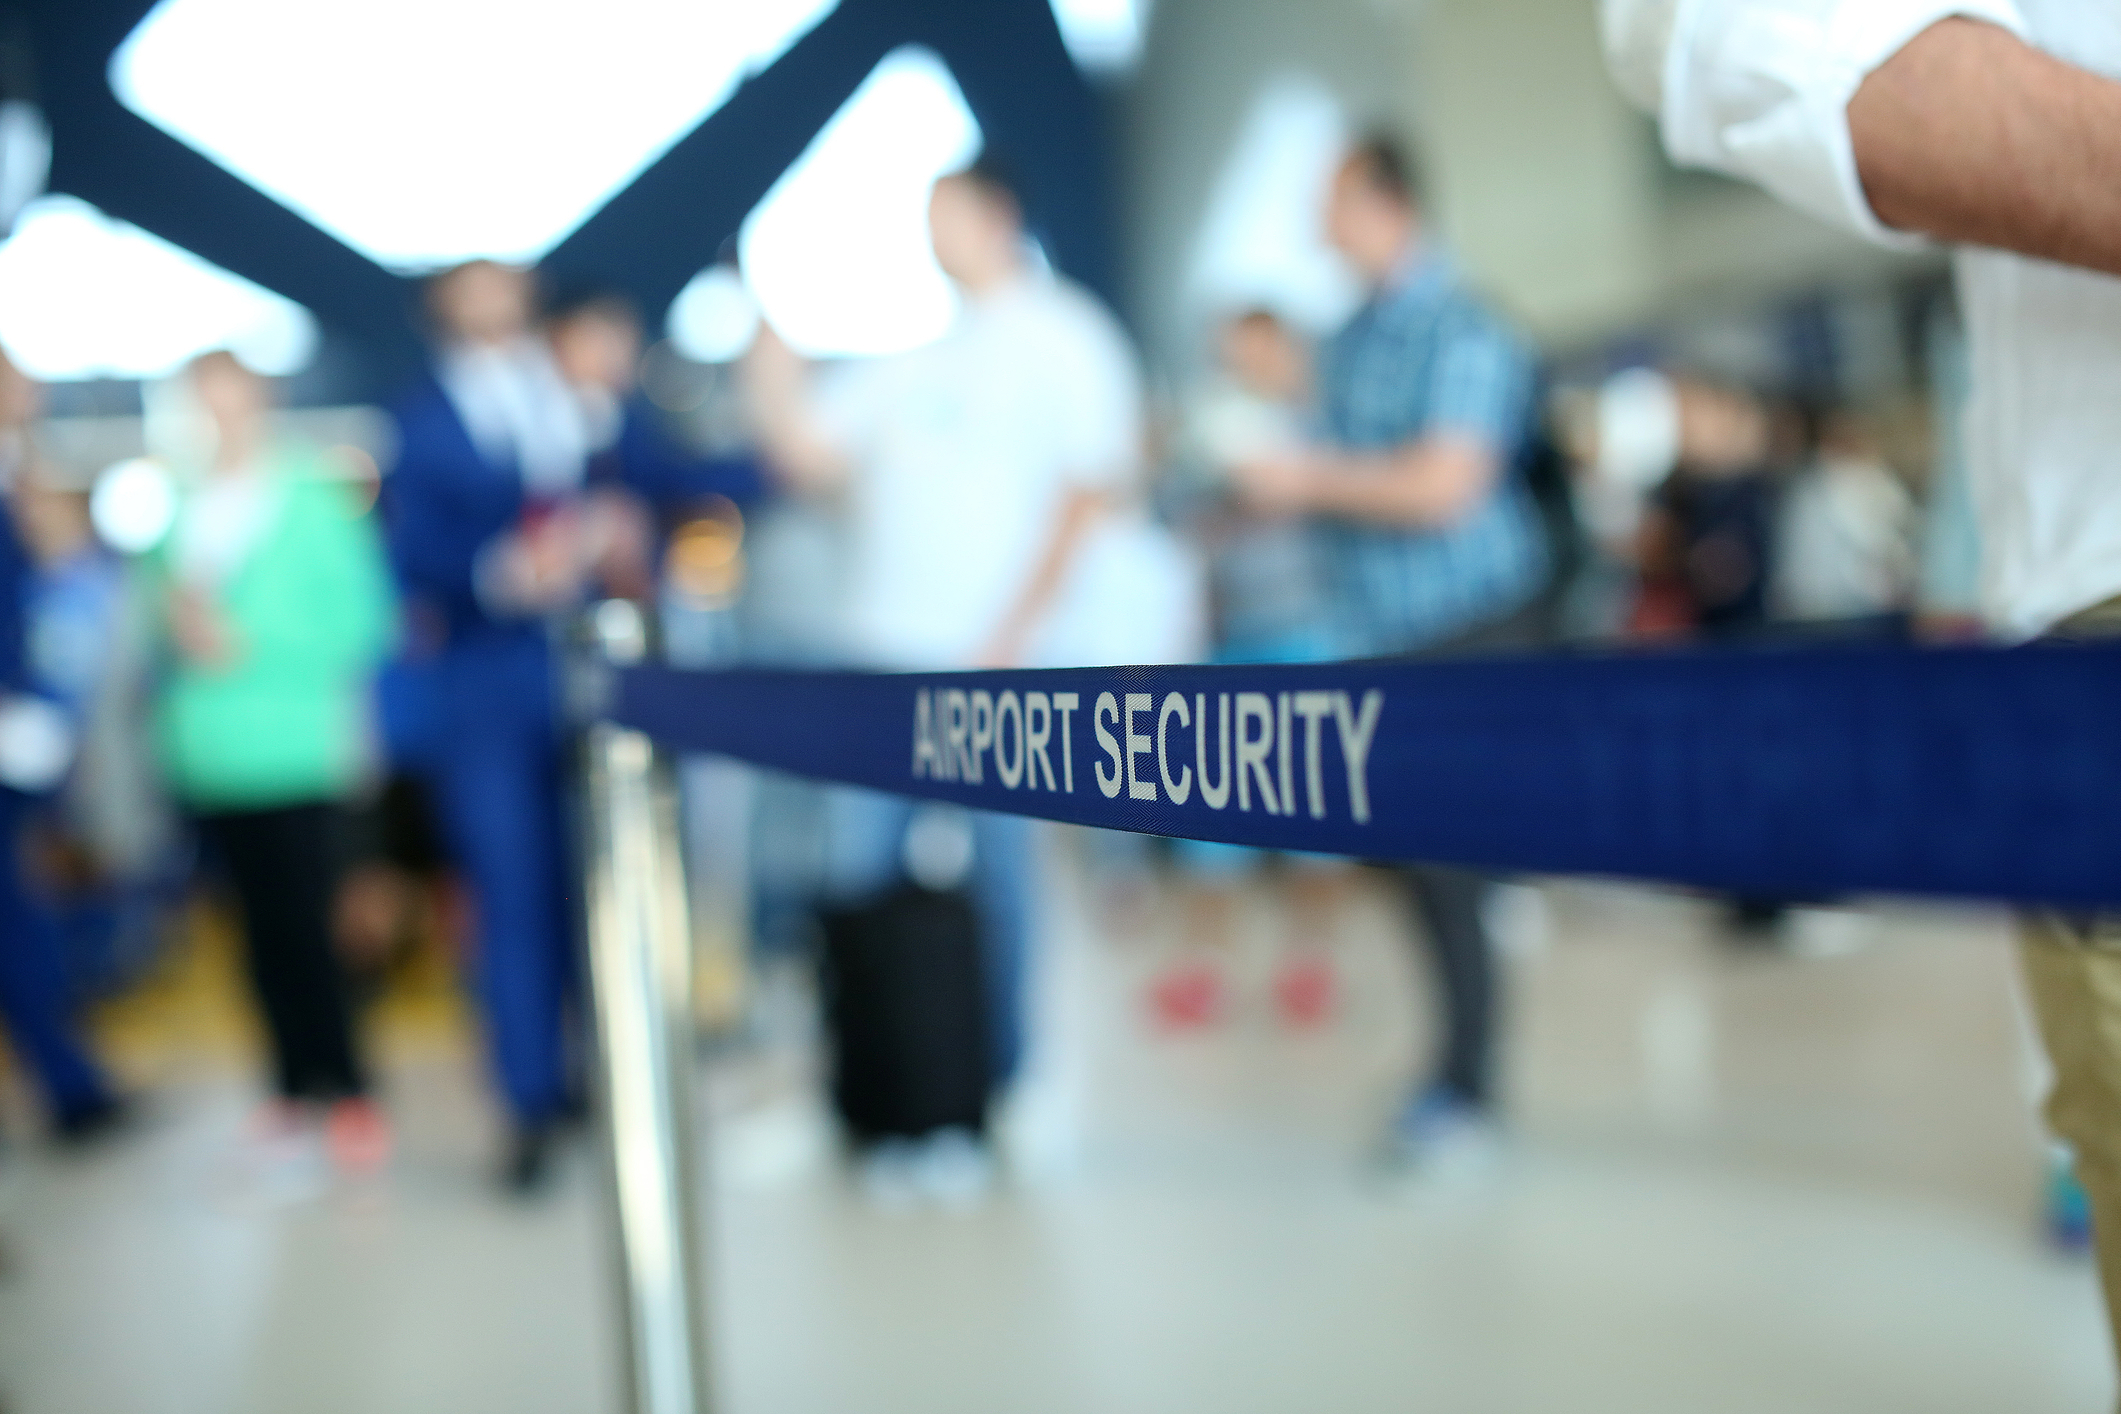 A sign reads "airport security" at an airport.